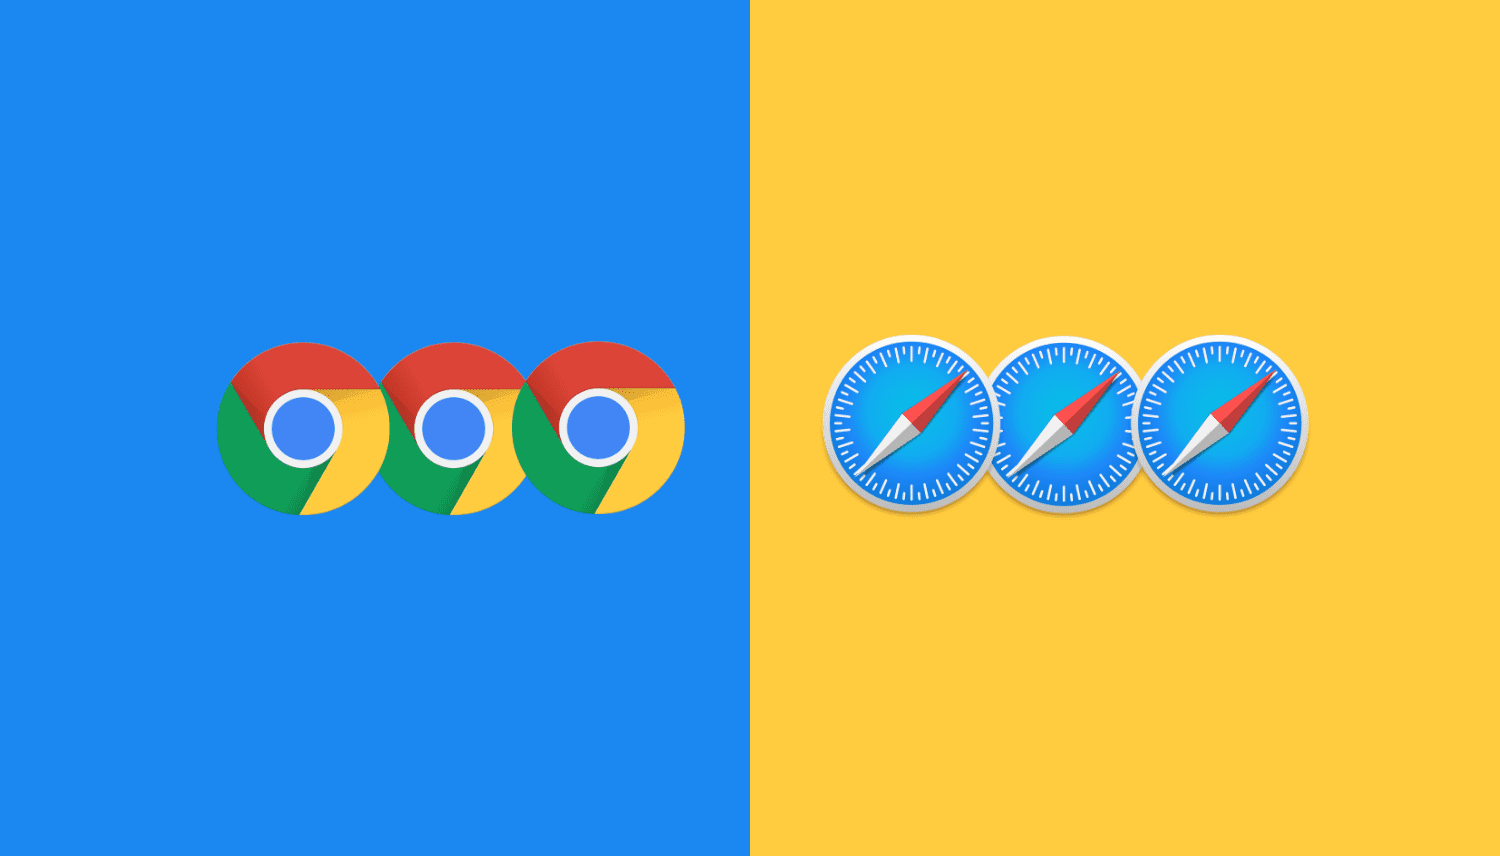 3 Chrome and Safari logo on blue and yellow background